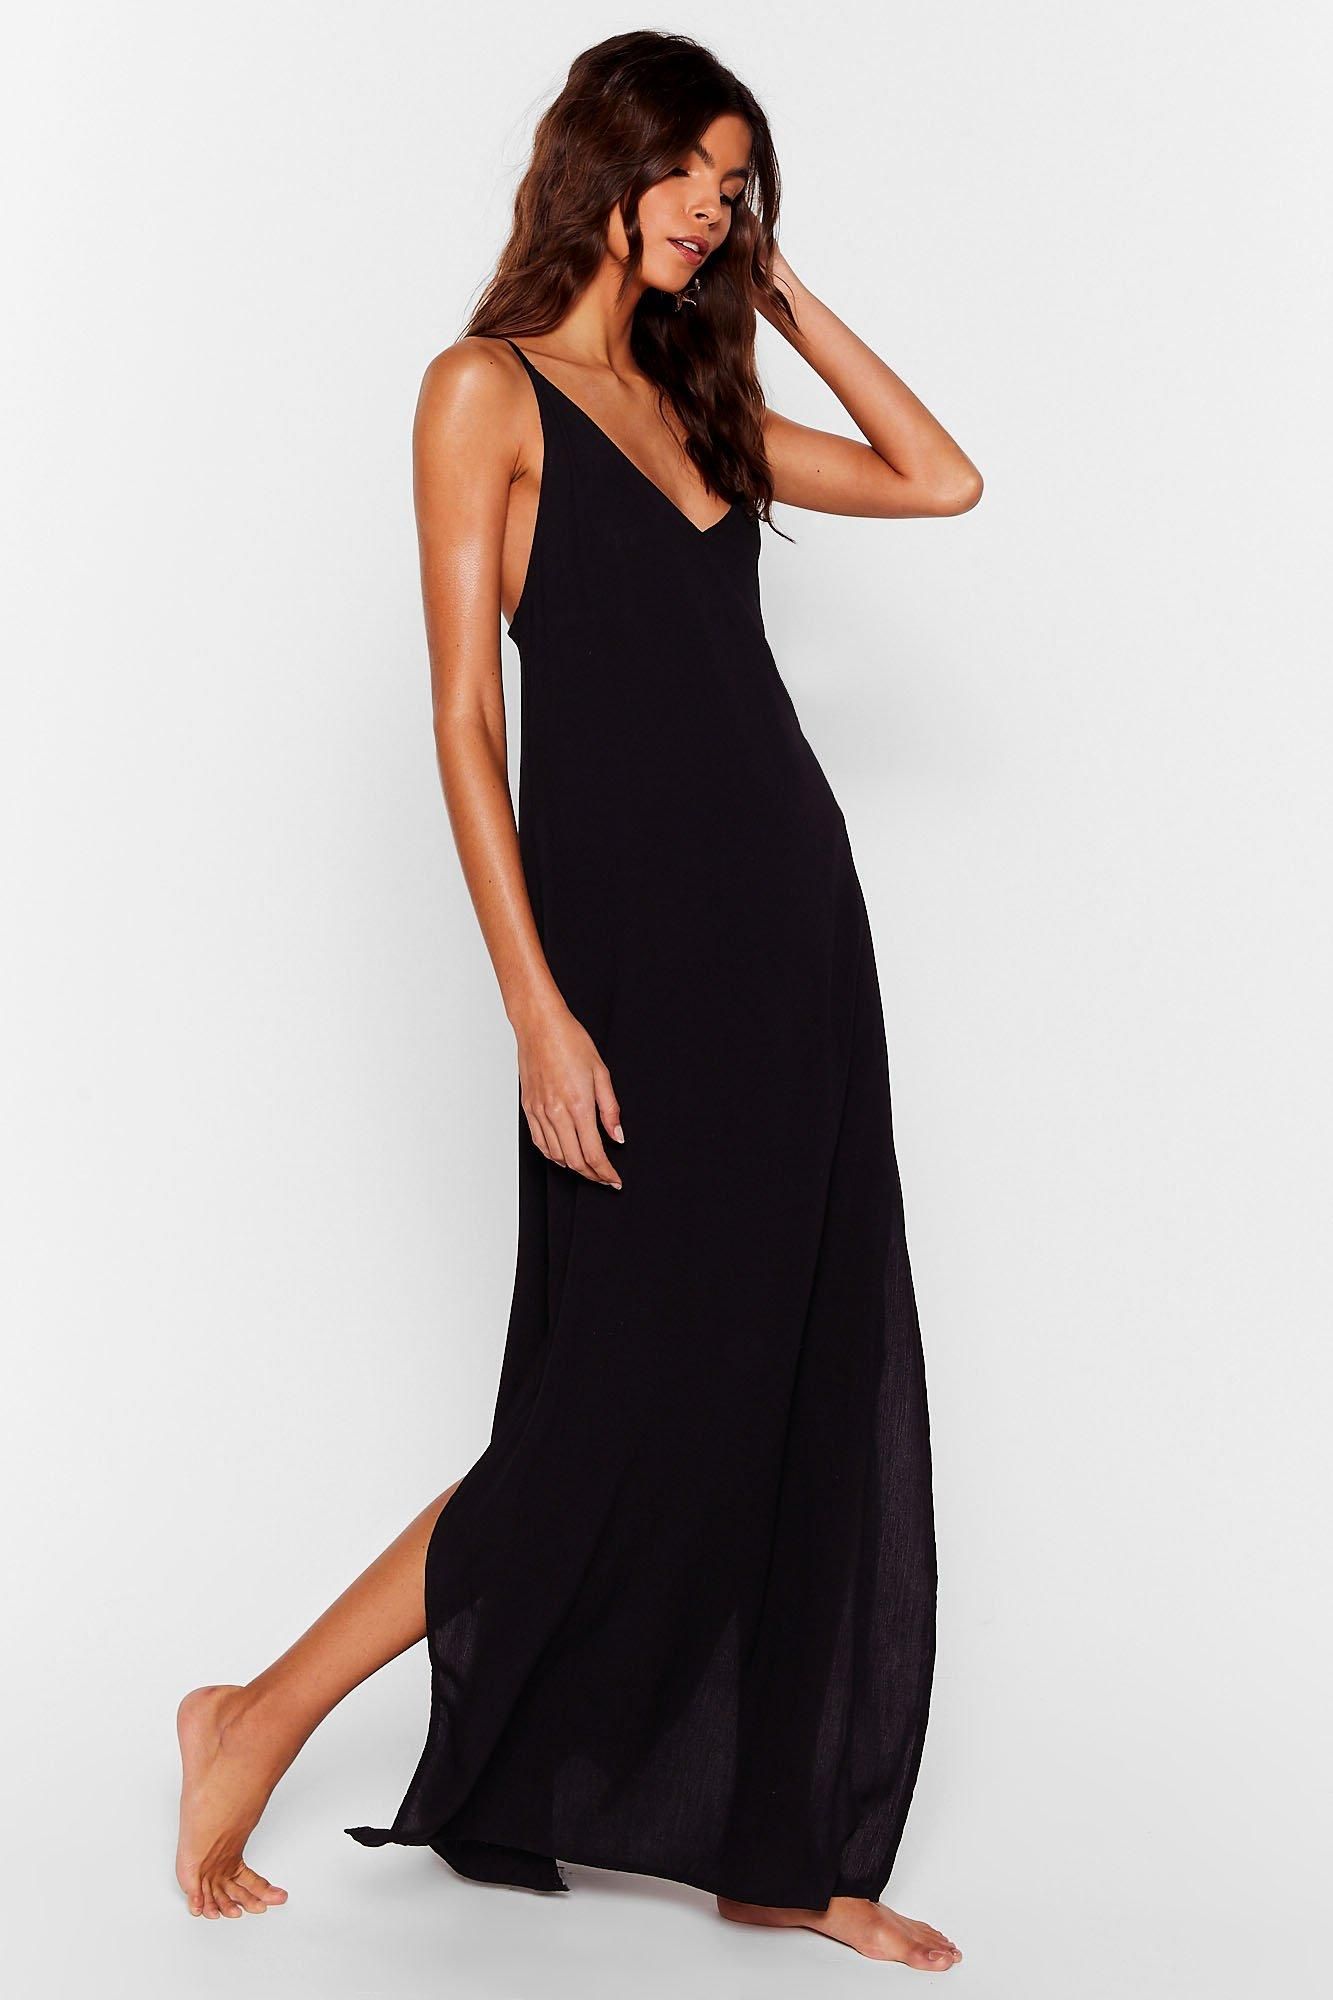 Haven't Sea-n You in Forever Cover-Up Maxi Dress | NastyGal (US & CA)